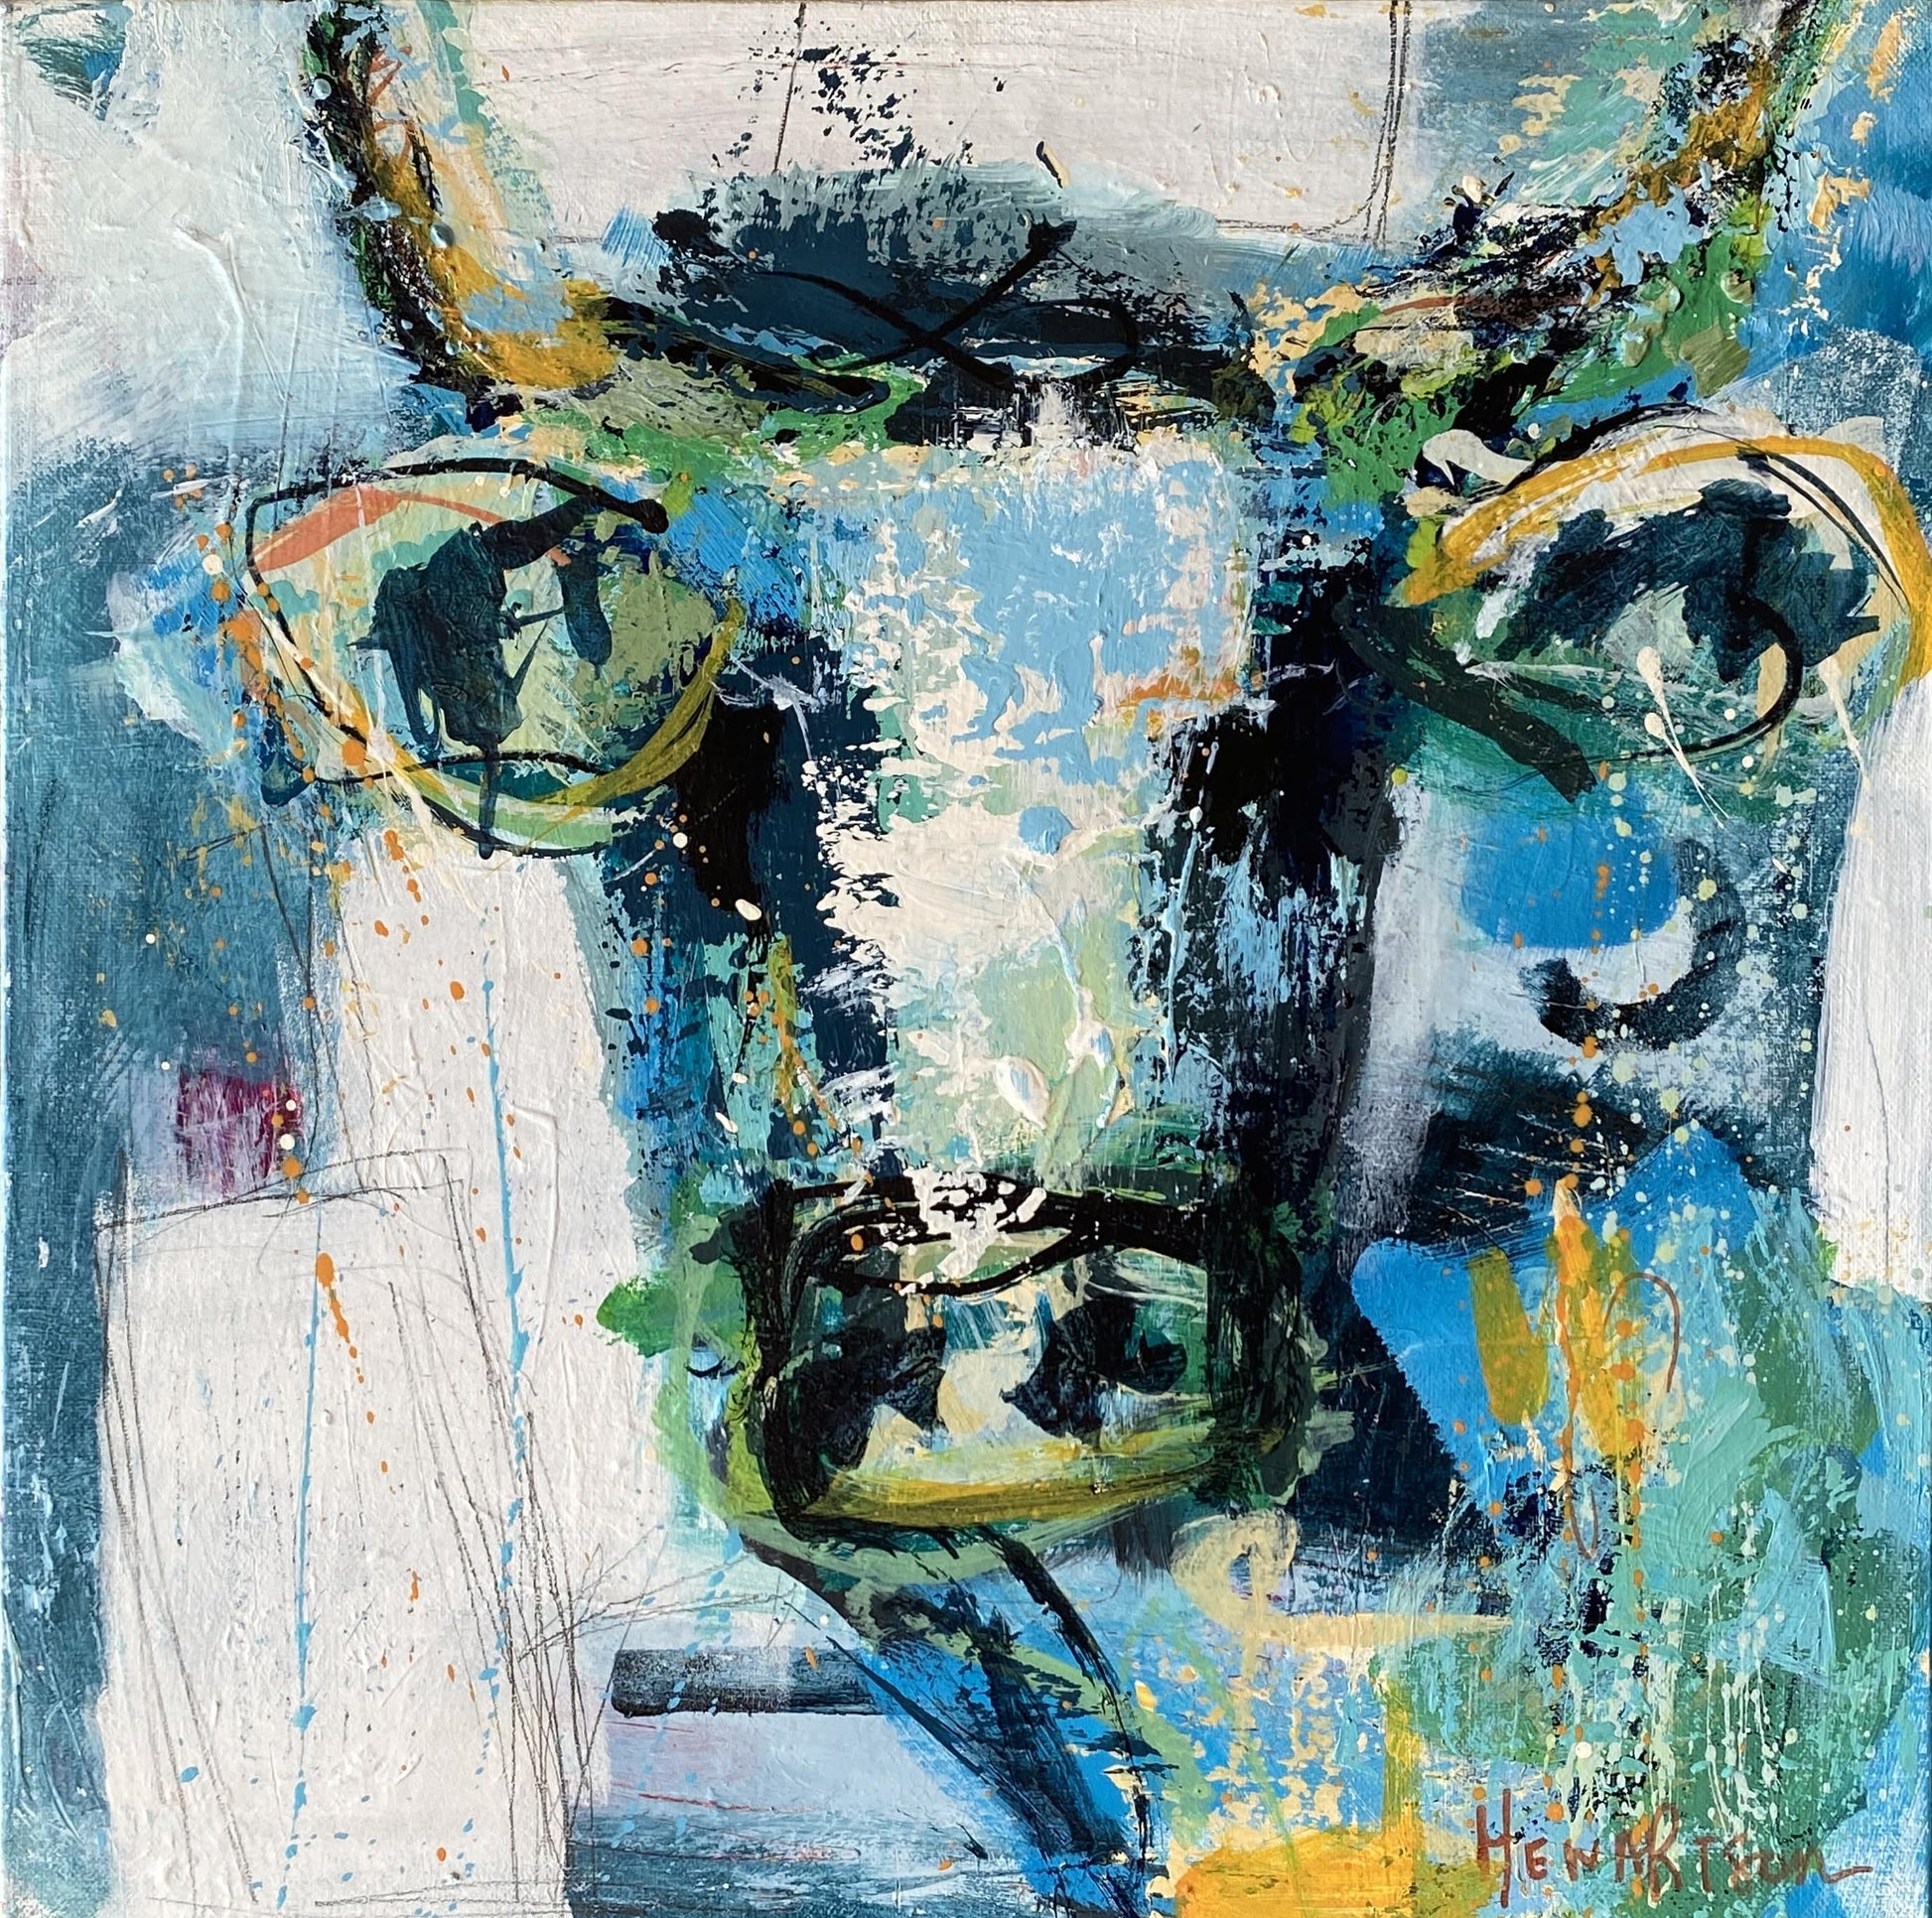 Conrad - by Australian Artist Rose Hewartson Original Abstract Cow Painting on Canvas Framed 45 x 45cm Statement Piece